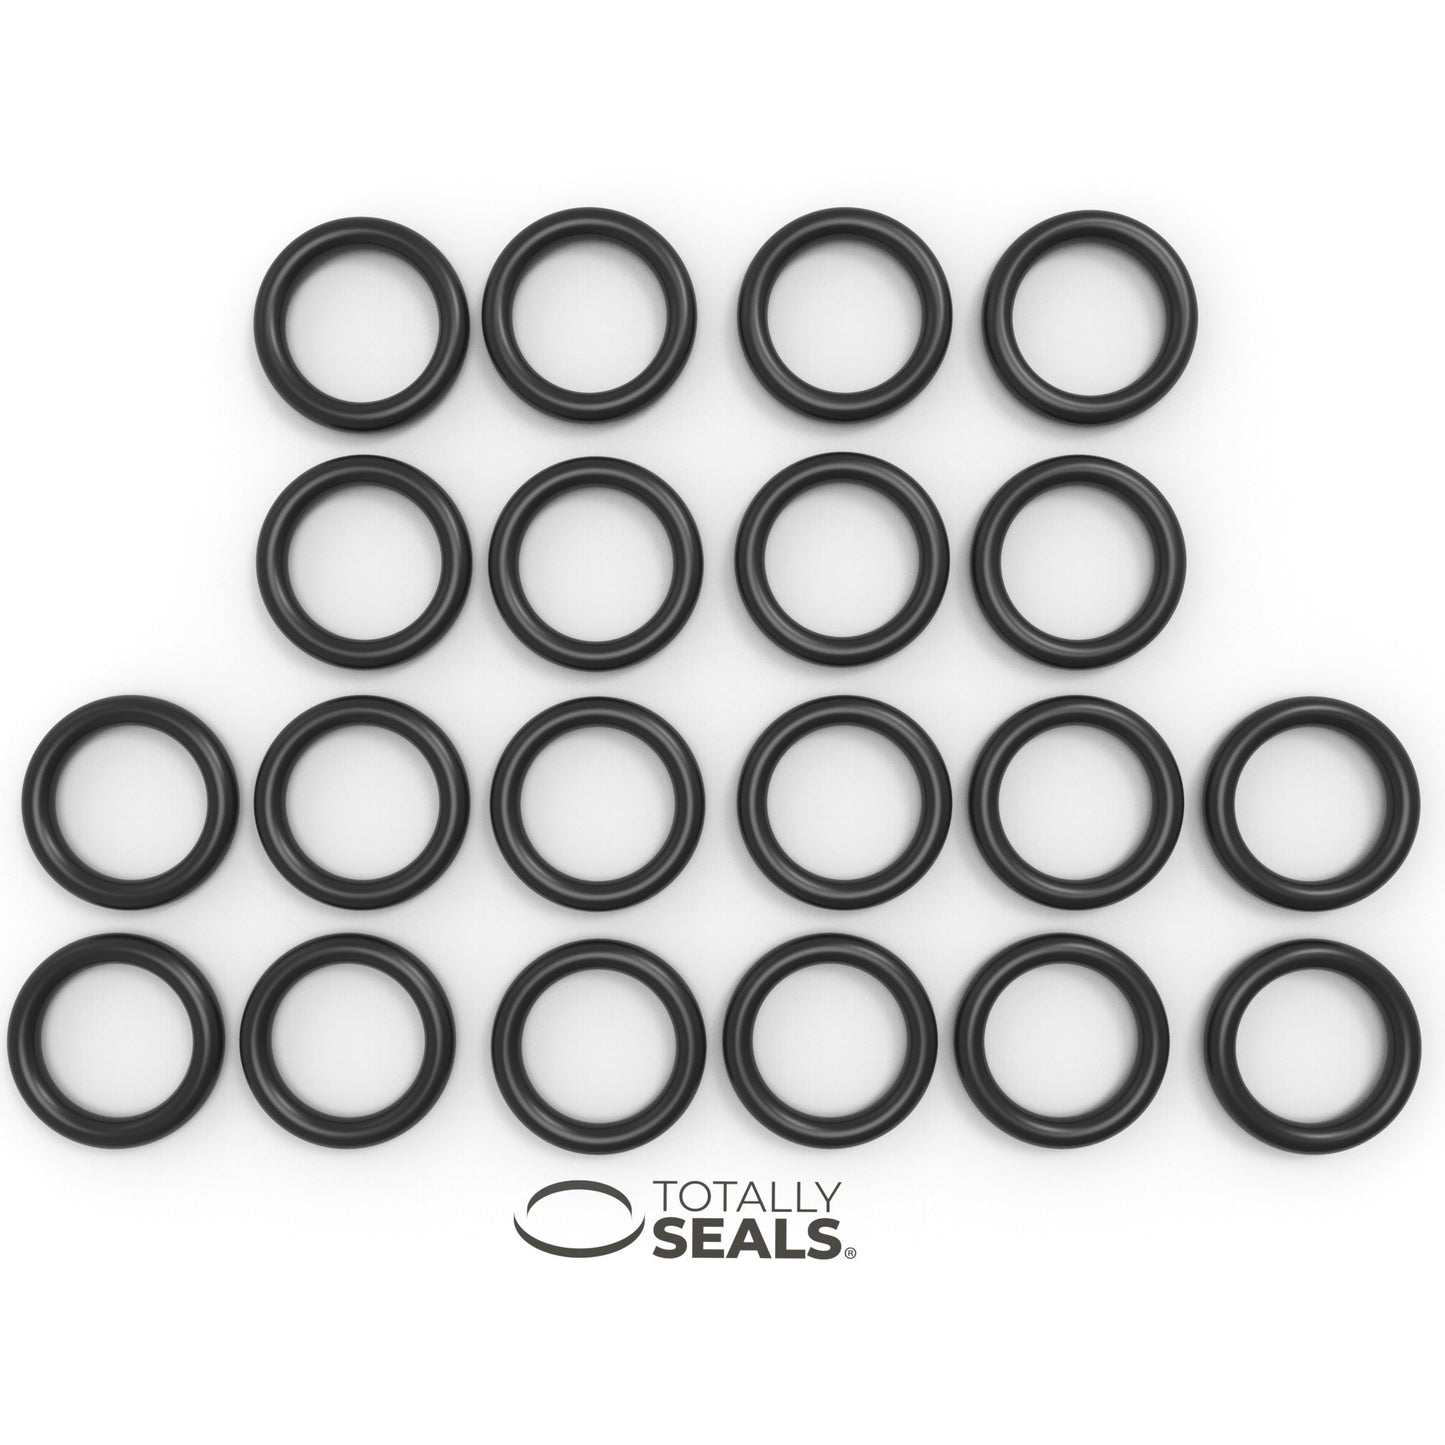 30mm x 3mm (36mm OD) Nitrile O-Rings - Totally Seals®